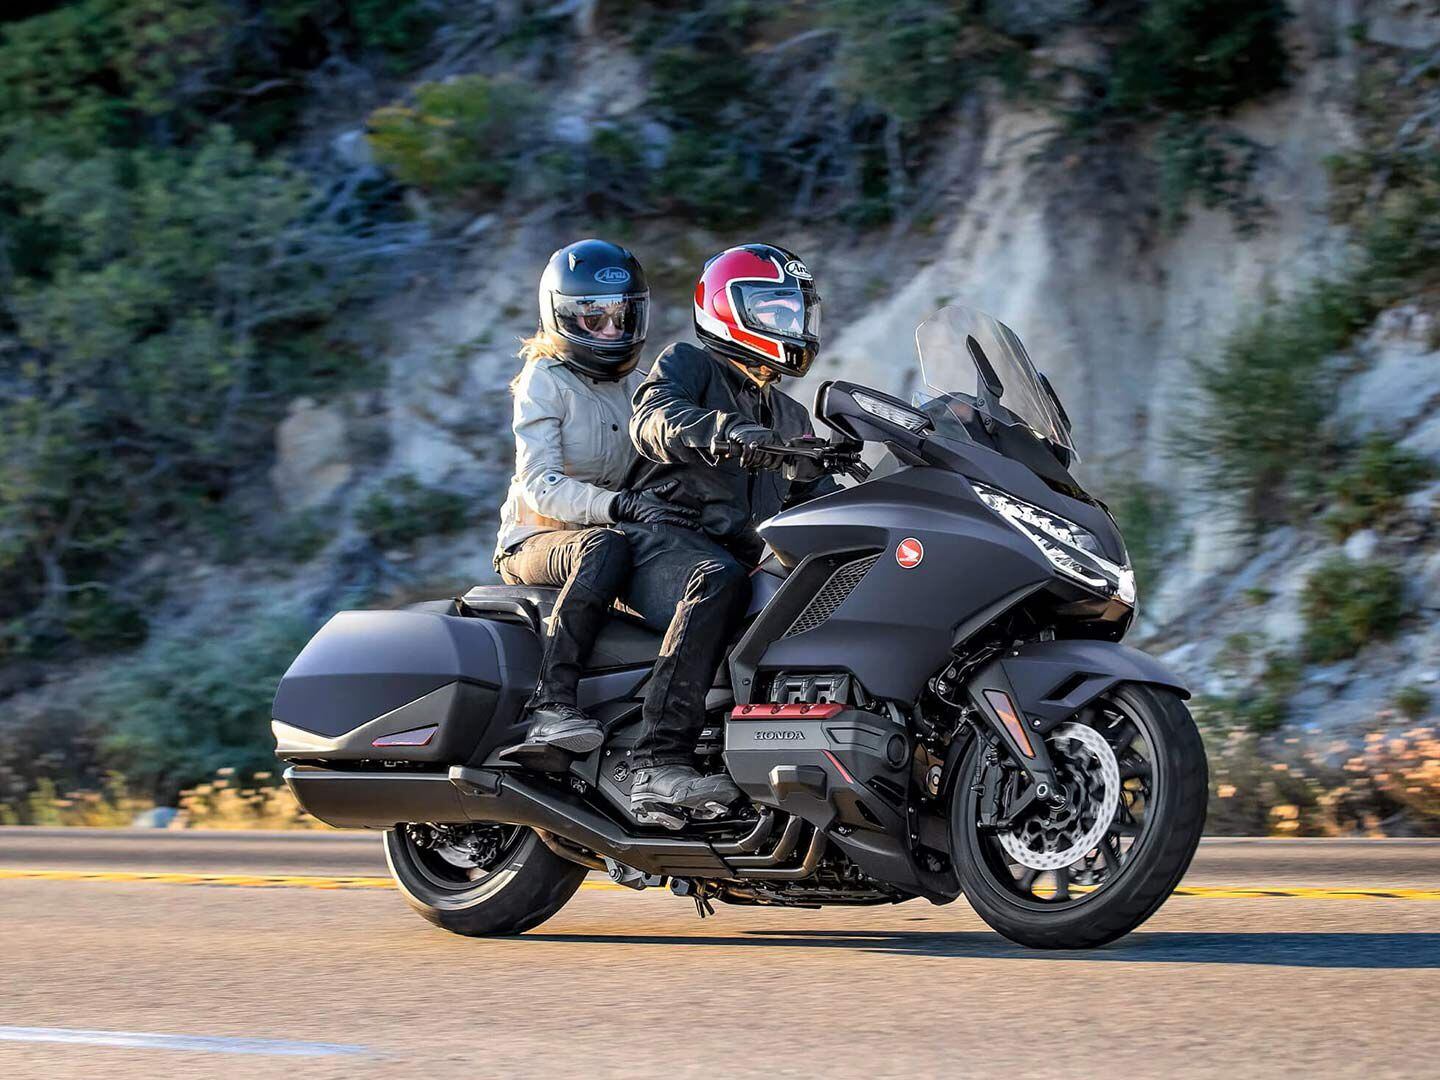 It may be close to 900 pounds, but the base Gold Wing still manages to offer a sub-30-inch seat height and supremely balanced ride.